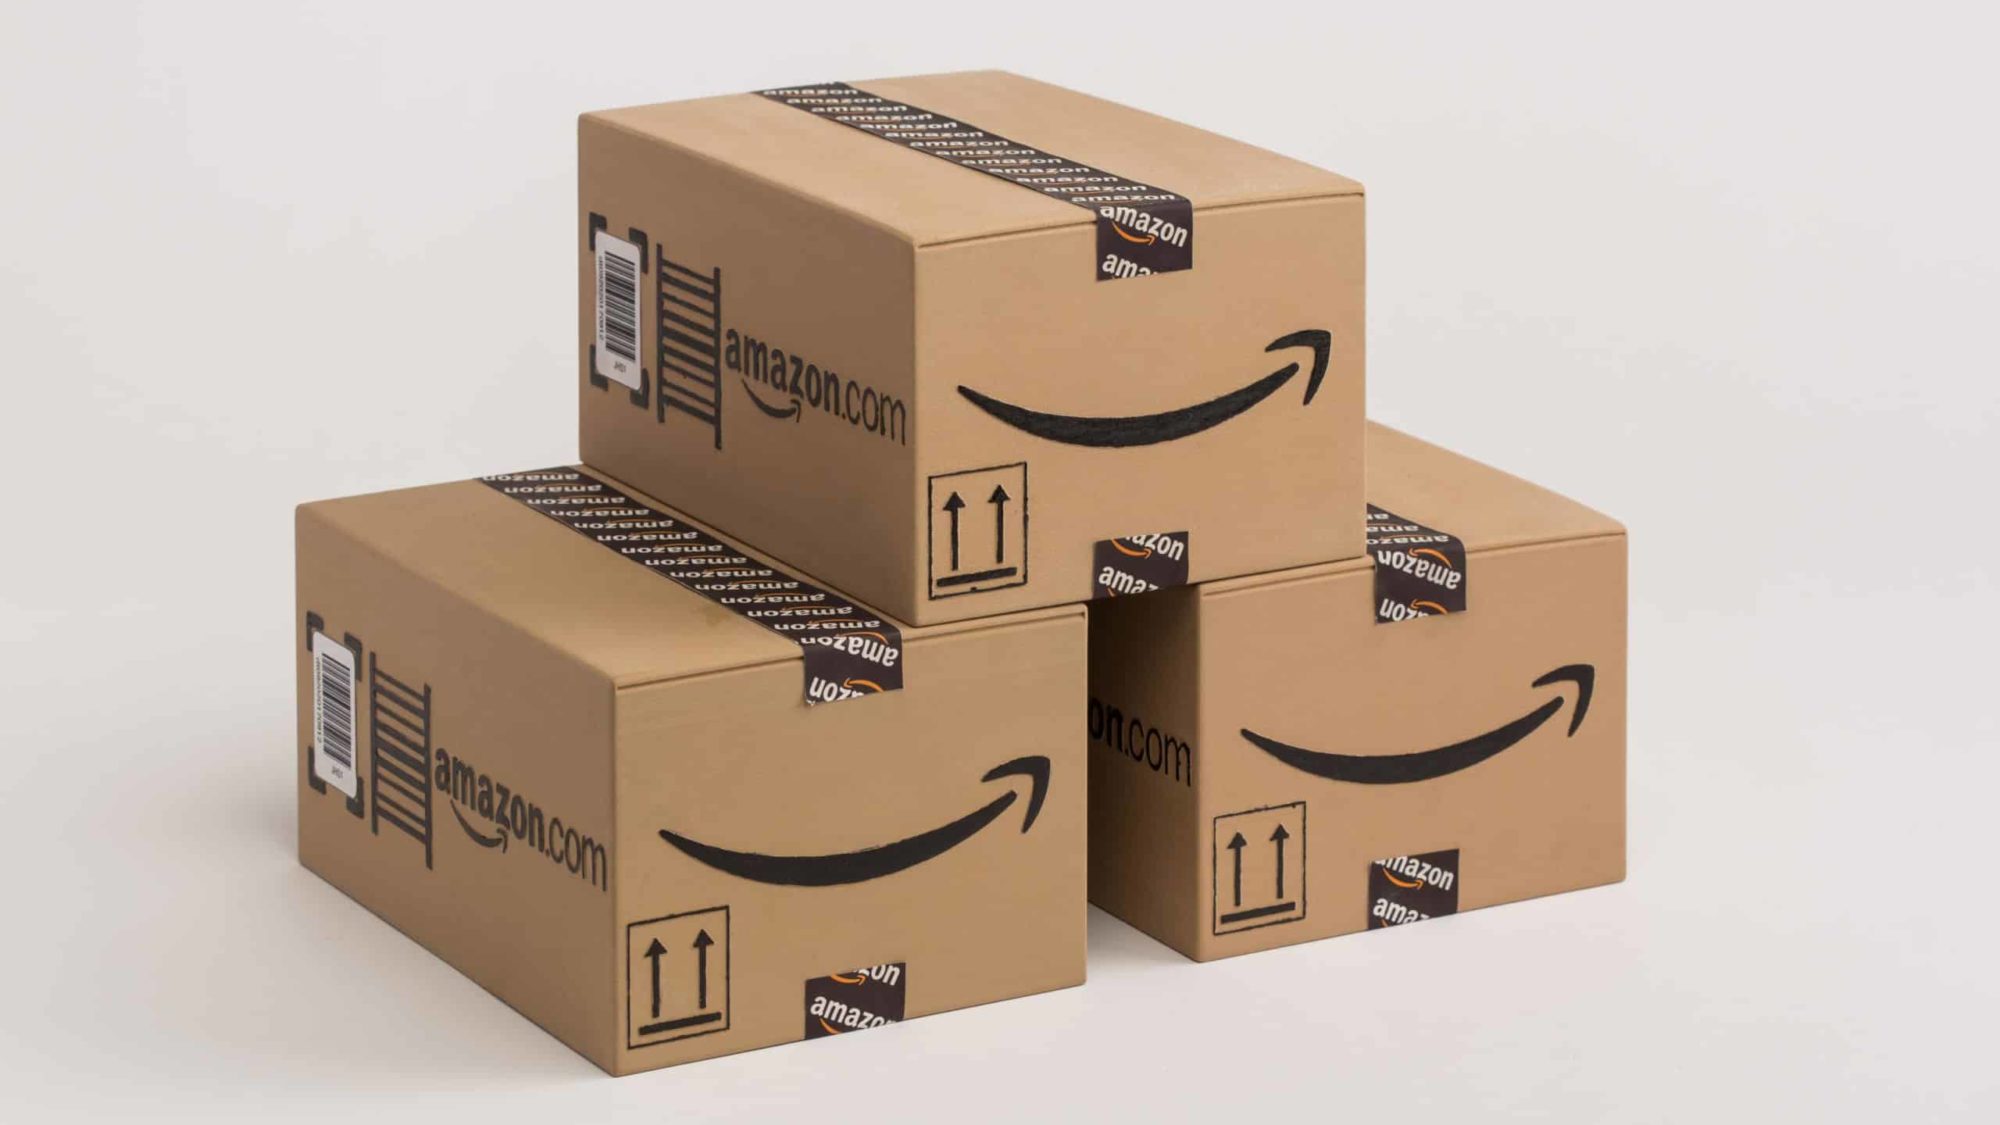 Amazon to launch own delivery service